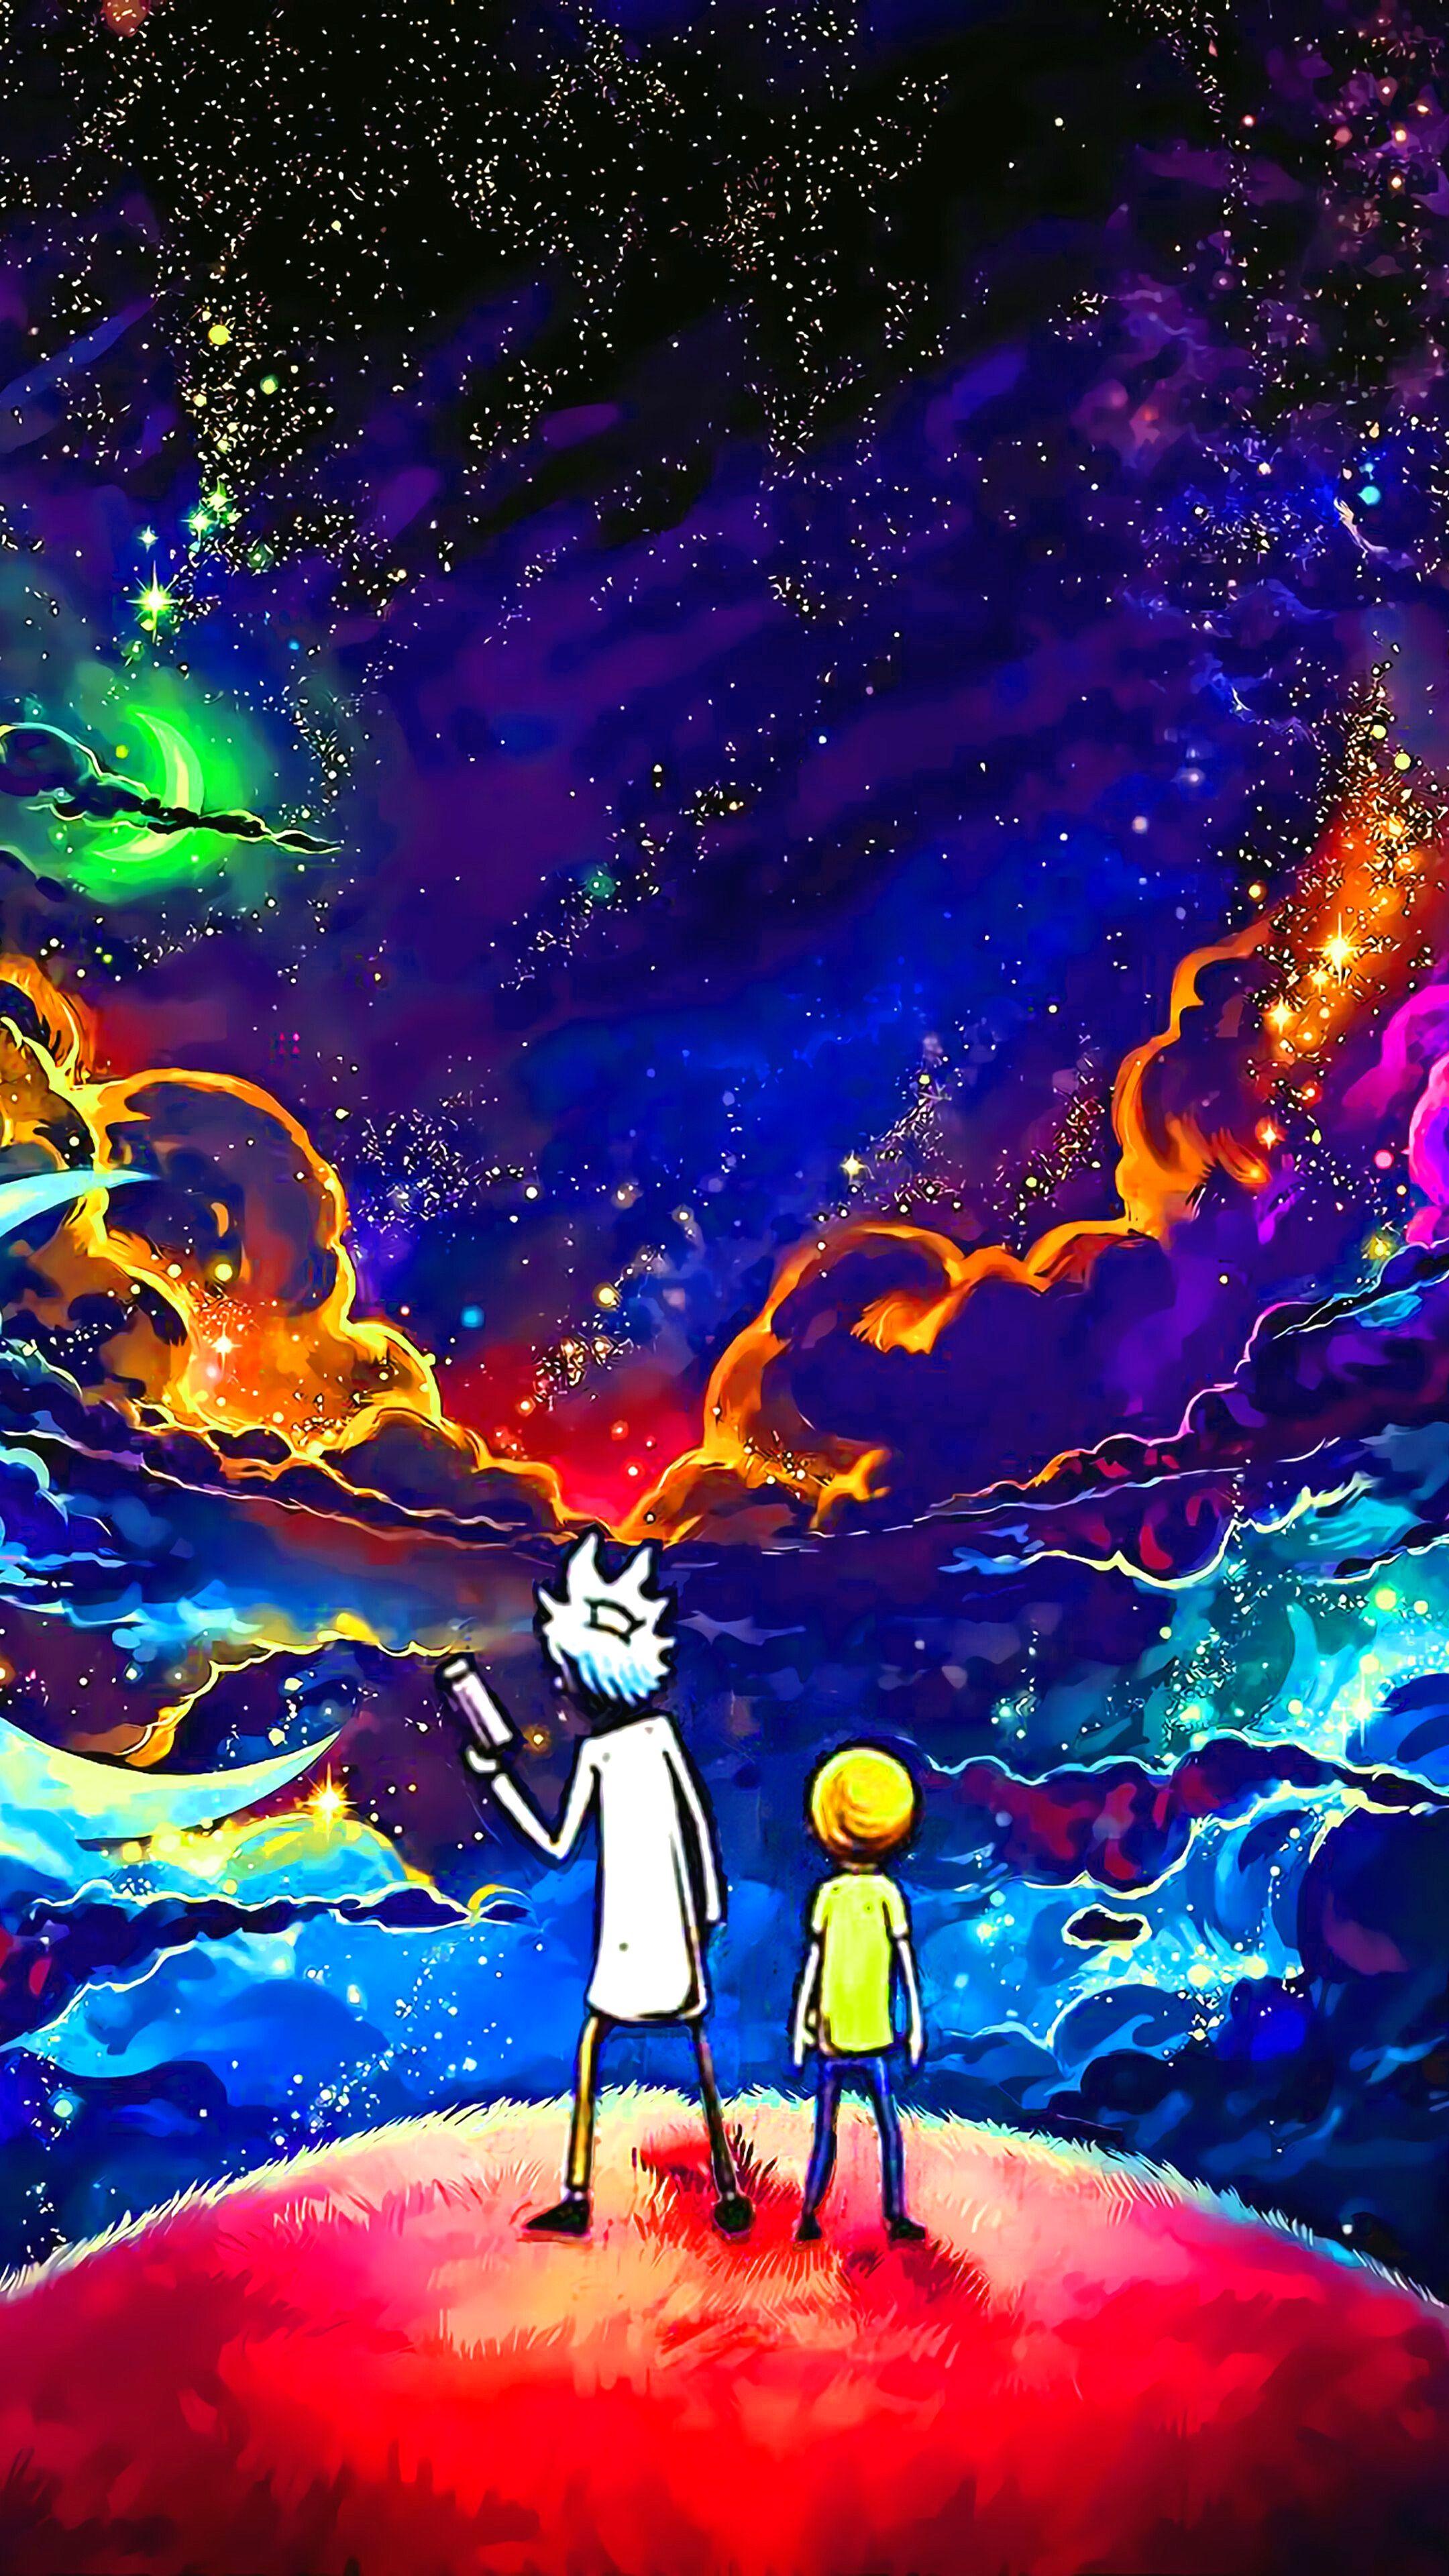 Rick and Morty aesthetic wallpaper iPhone HD